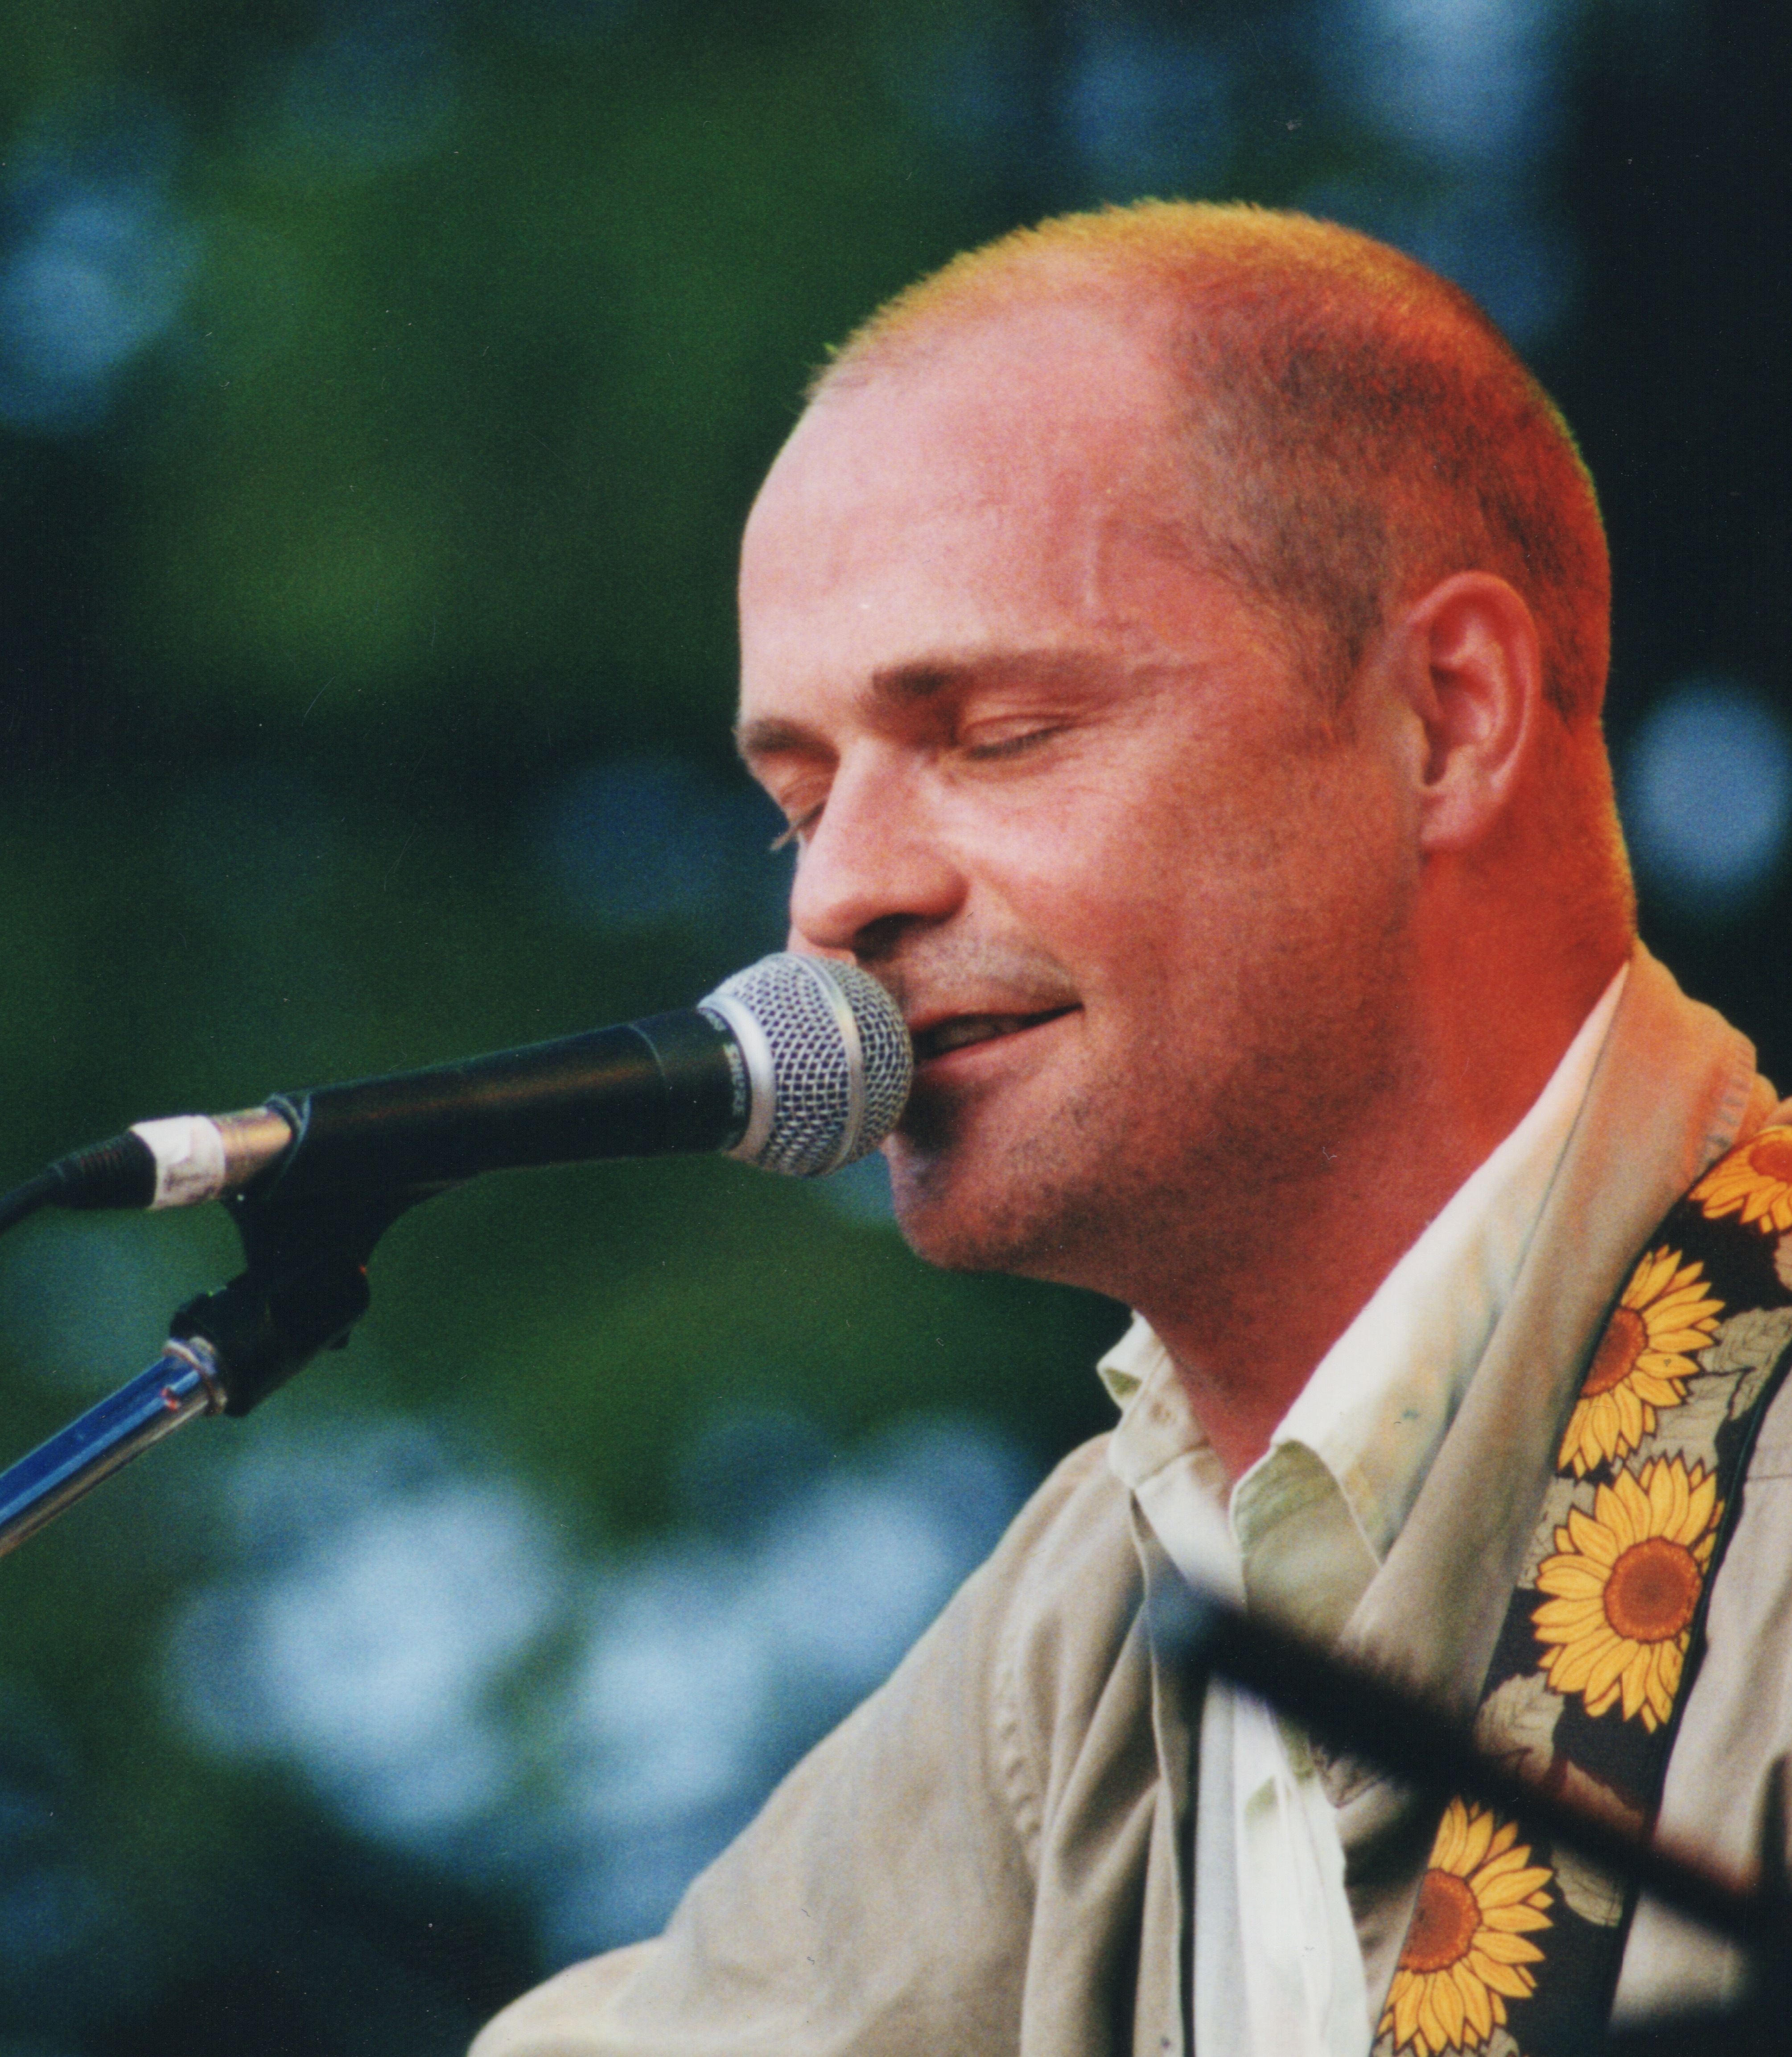 What did Gord Downie mean to you?